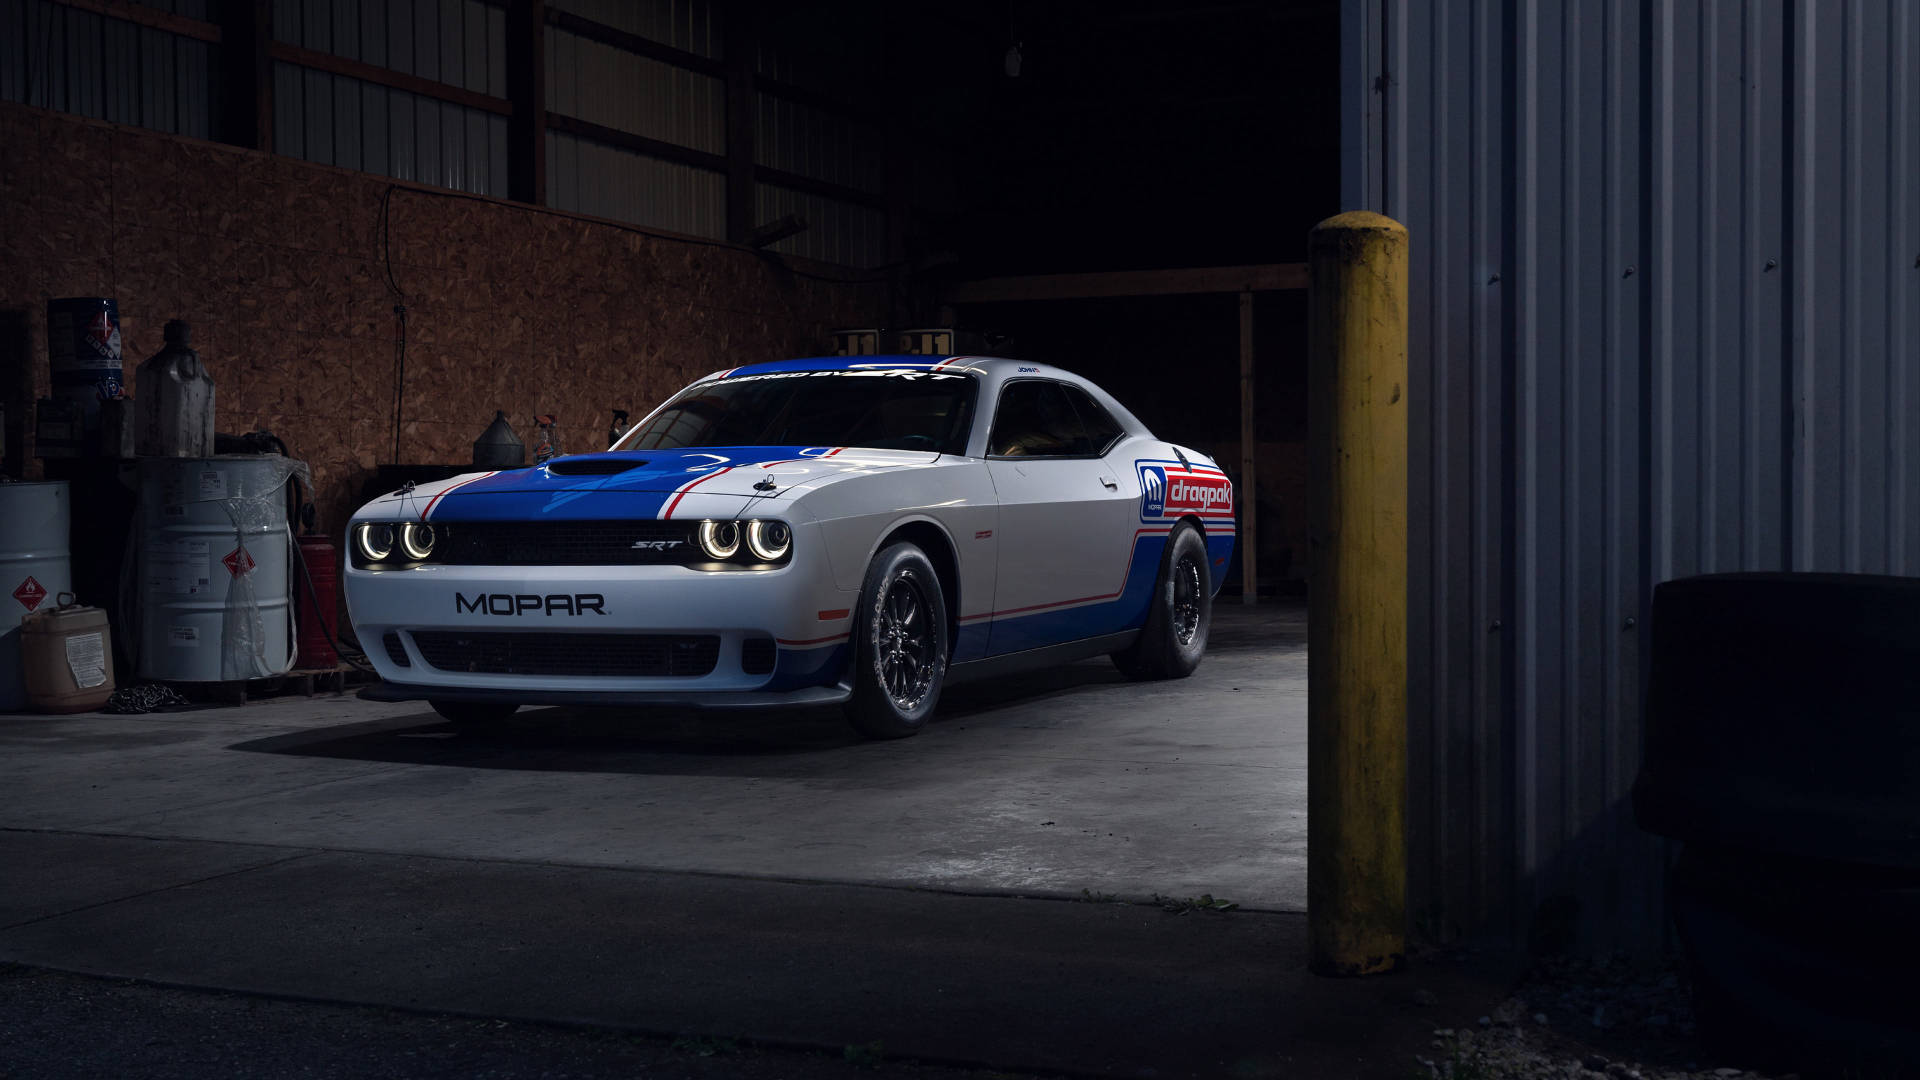 2021 White And Blue Dodge Challenger Wallpaper